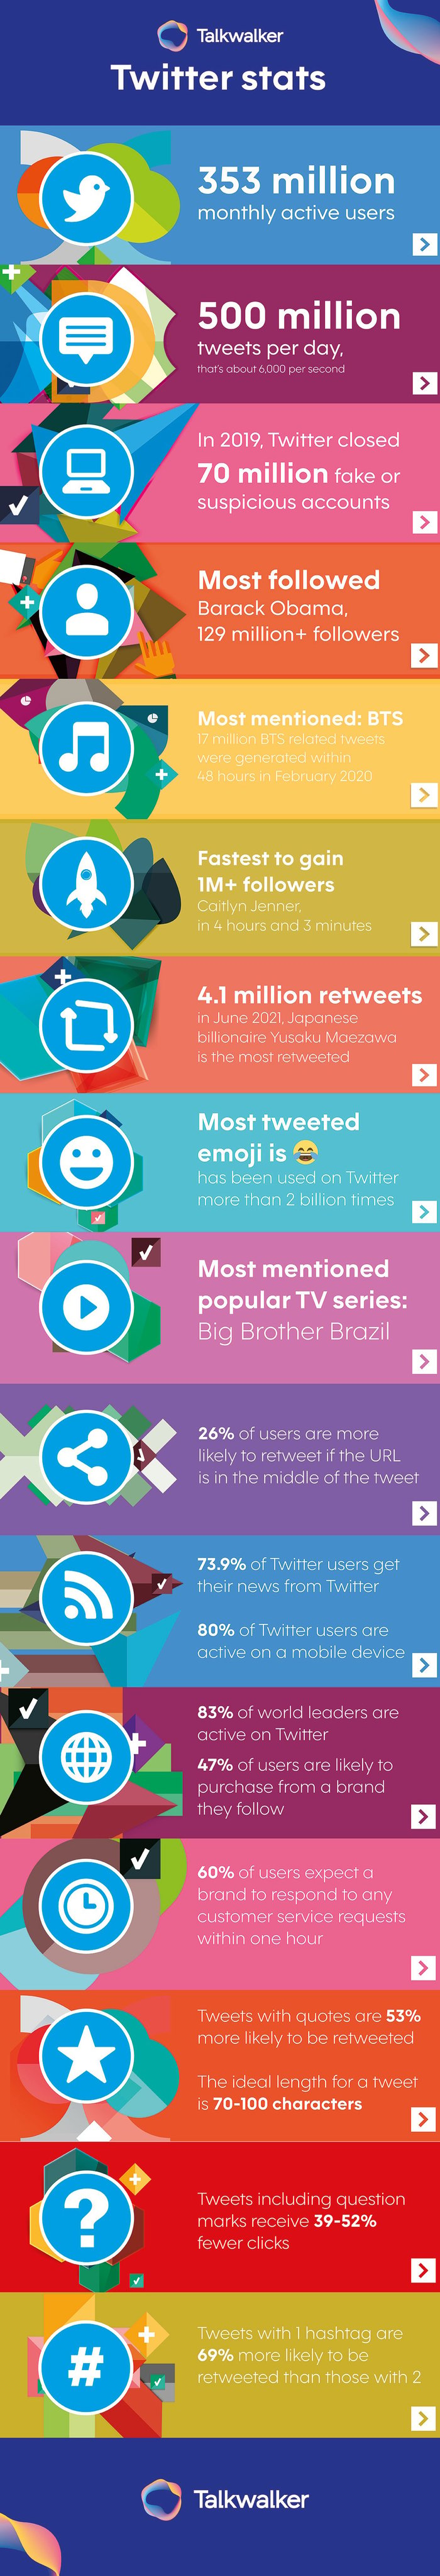 Infographic packed with Twitter statistics